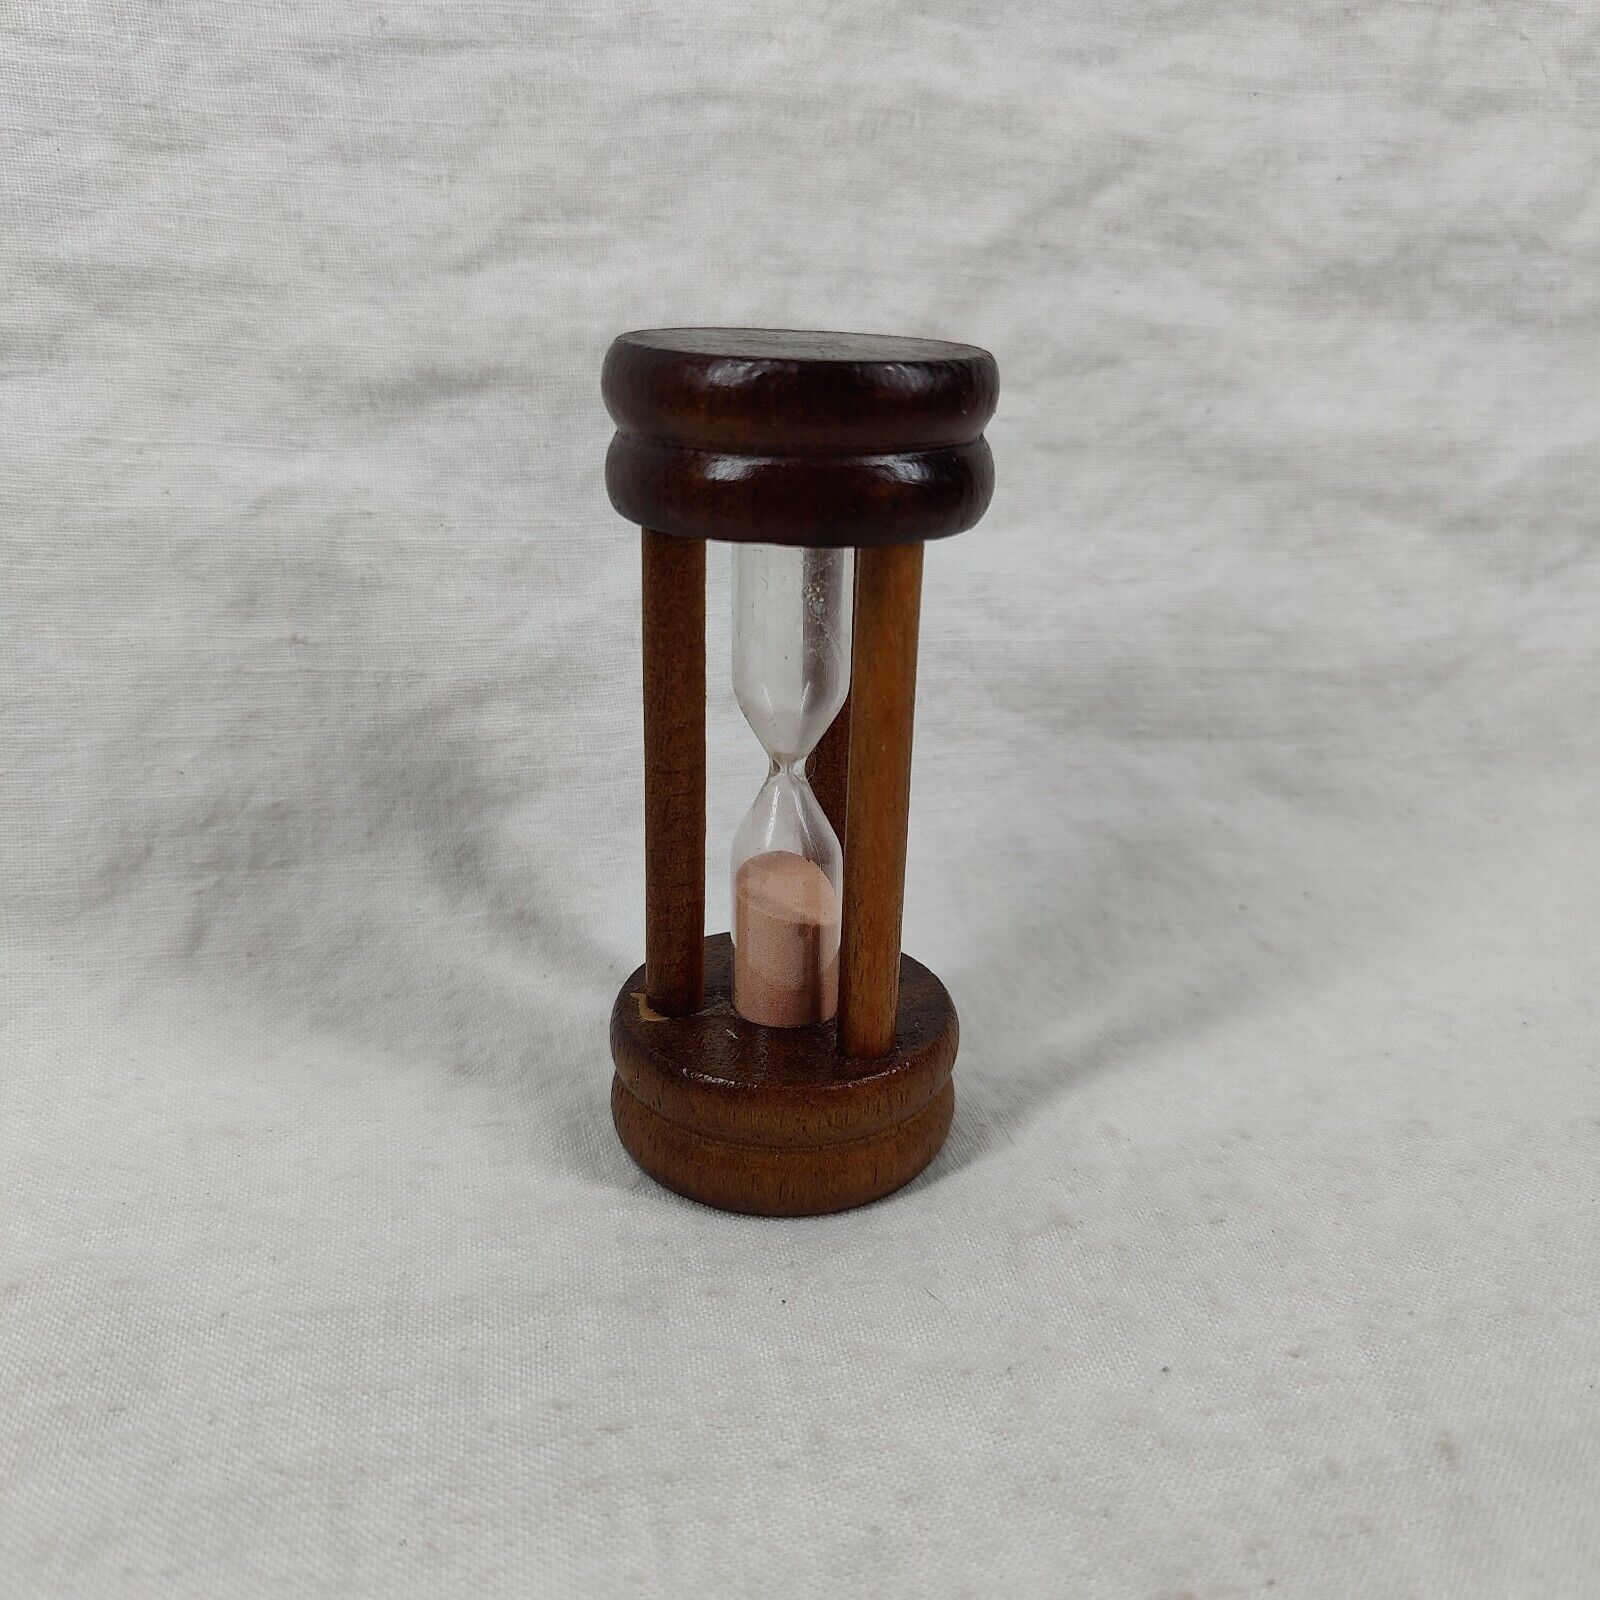 Collectible Vintage Wooden Sand Timer 4" Hourglass Pink Sand Desk Top Home Decor